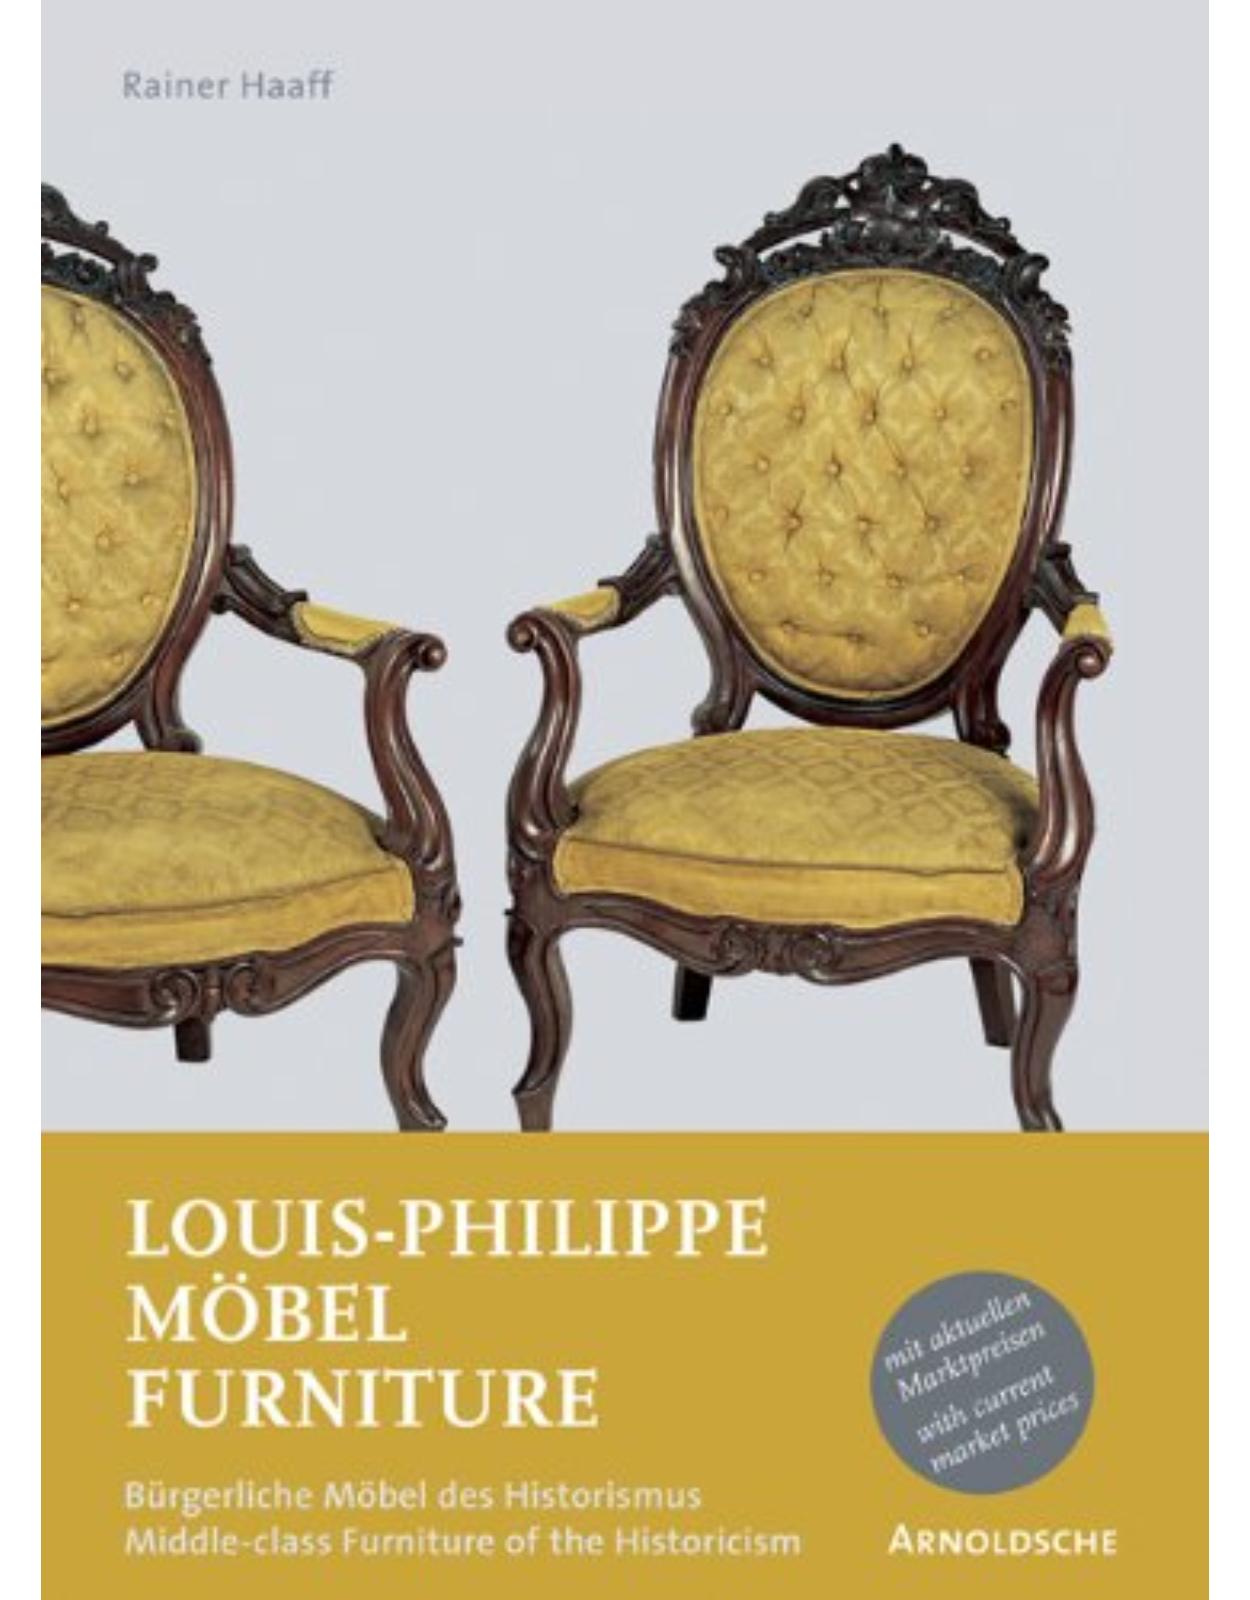 Louis-Philippe Furniture: Early Historicism (1850-1870)